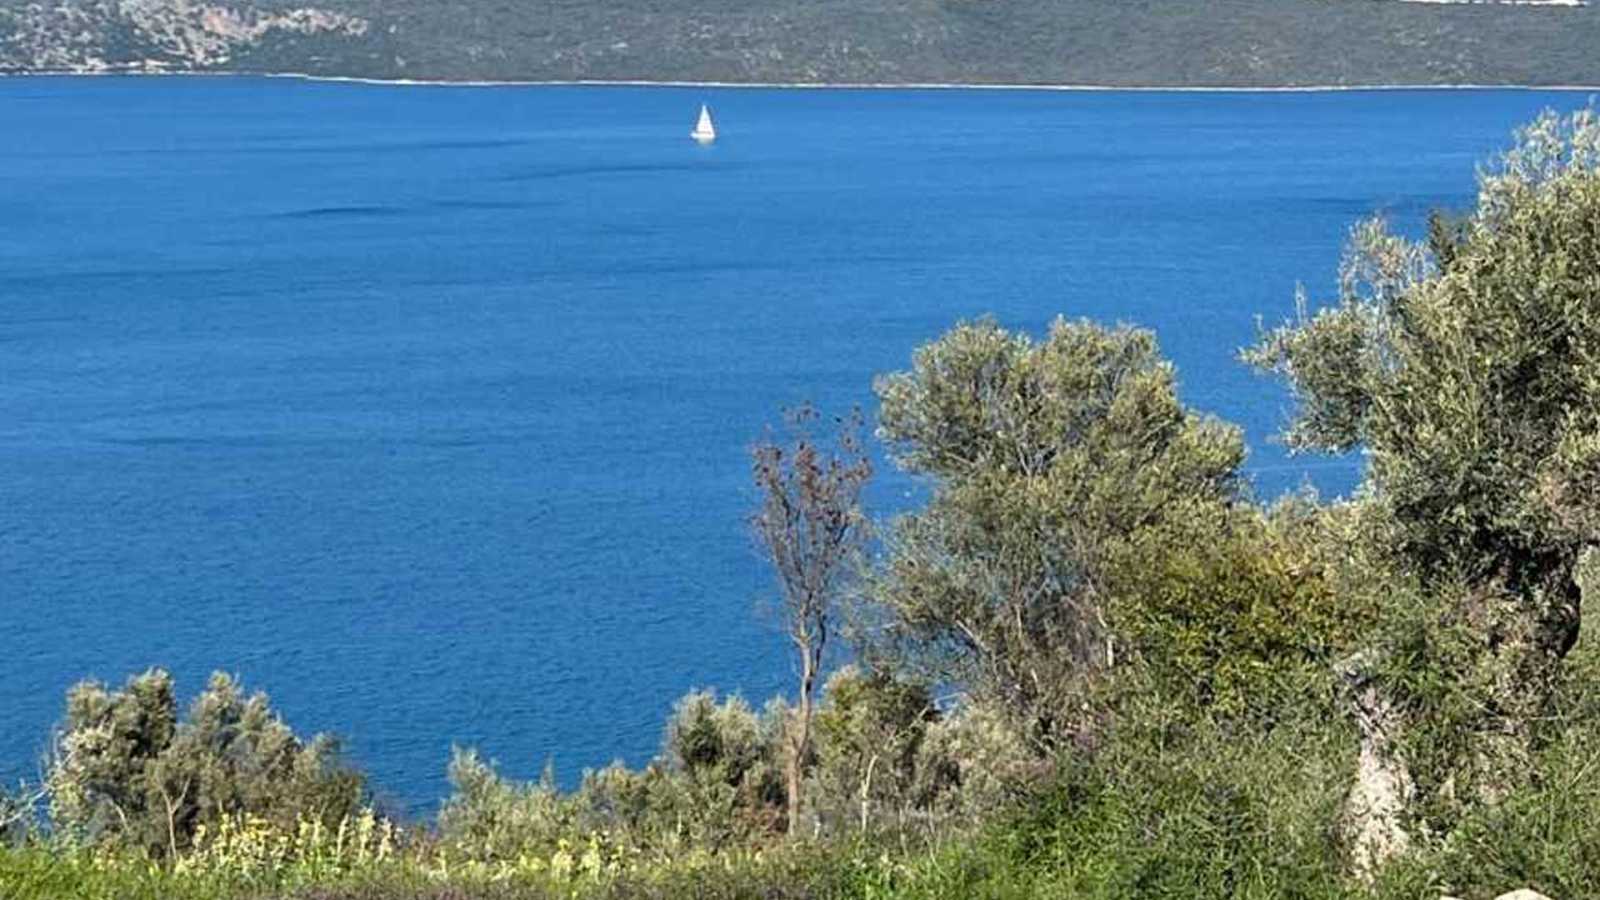 Coastal view of the Ionian Sea from Lefkada, with lush greenery in the foreground and a solitary sailboat on the horizon.